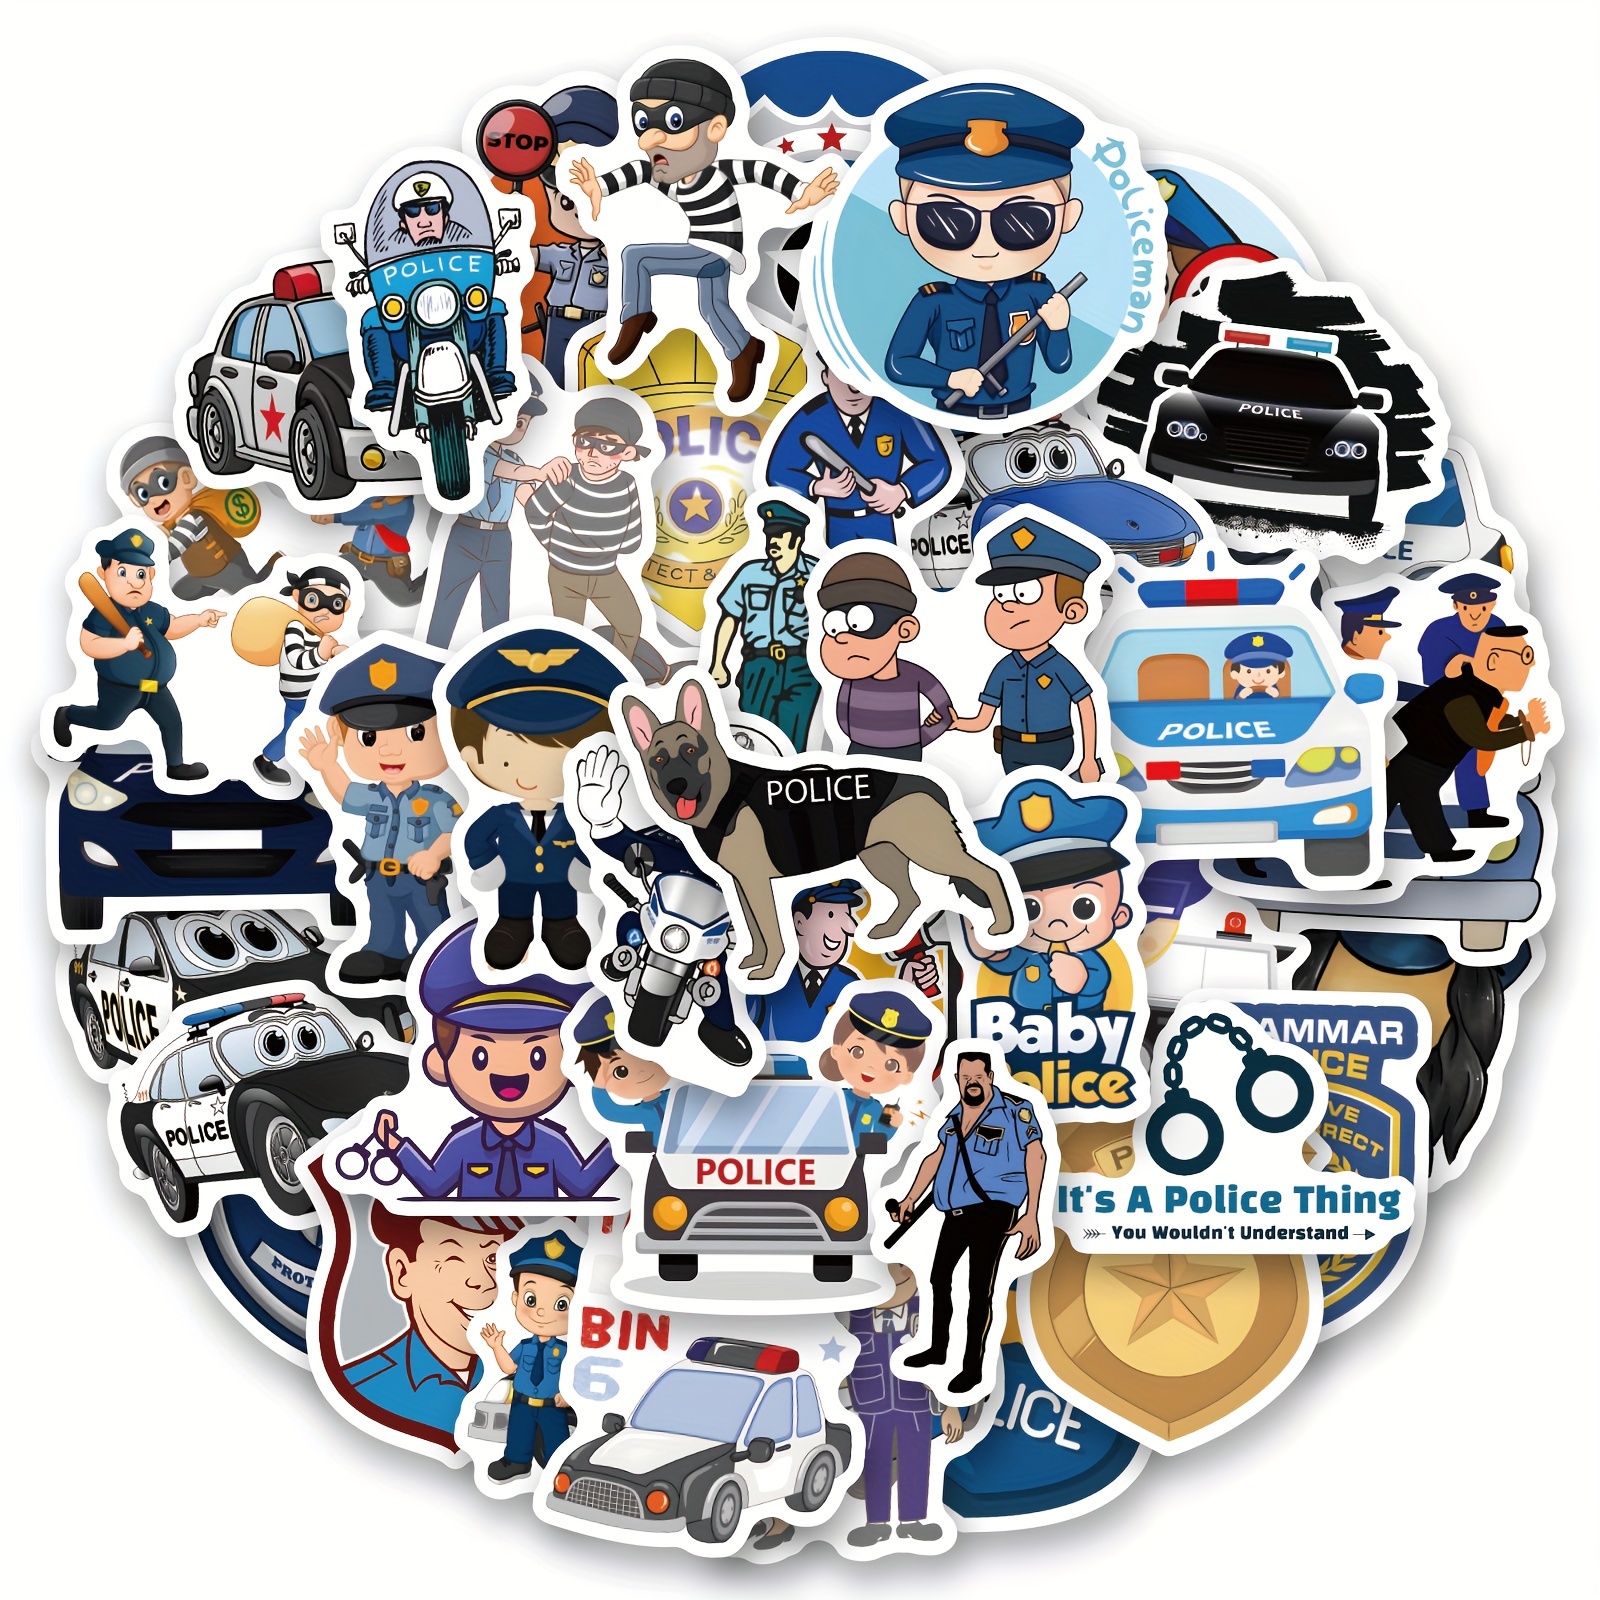 50PCS Police Car Stickers Police Stickers Police Gifts Police Officer Gifts  Police Merch Cop Gifts Aesthetic Stickers Vinyl Waterproof Stickers For  Water Bottle,Computer,Laptop,Phone,Luggage,Notebook